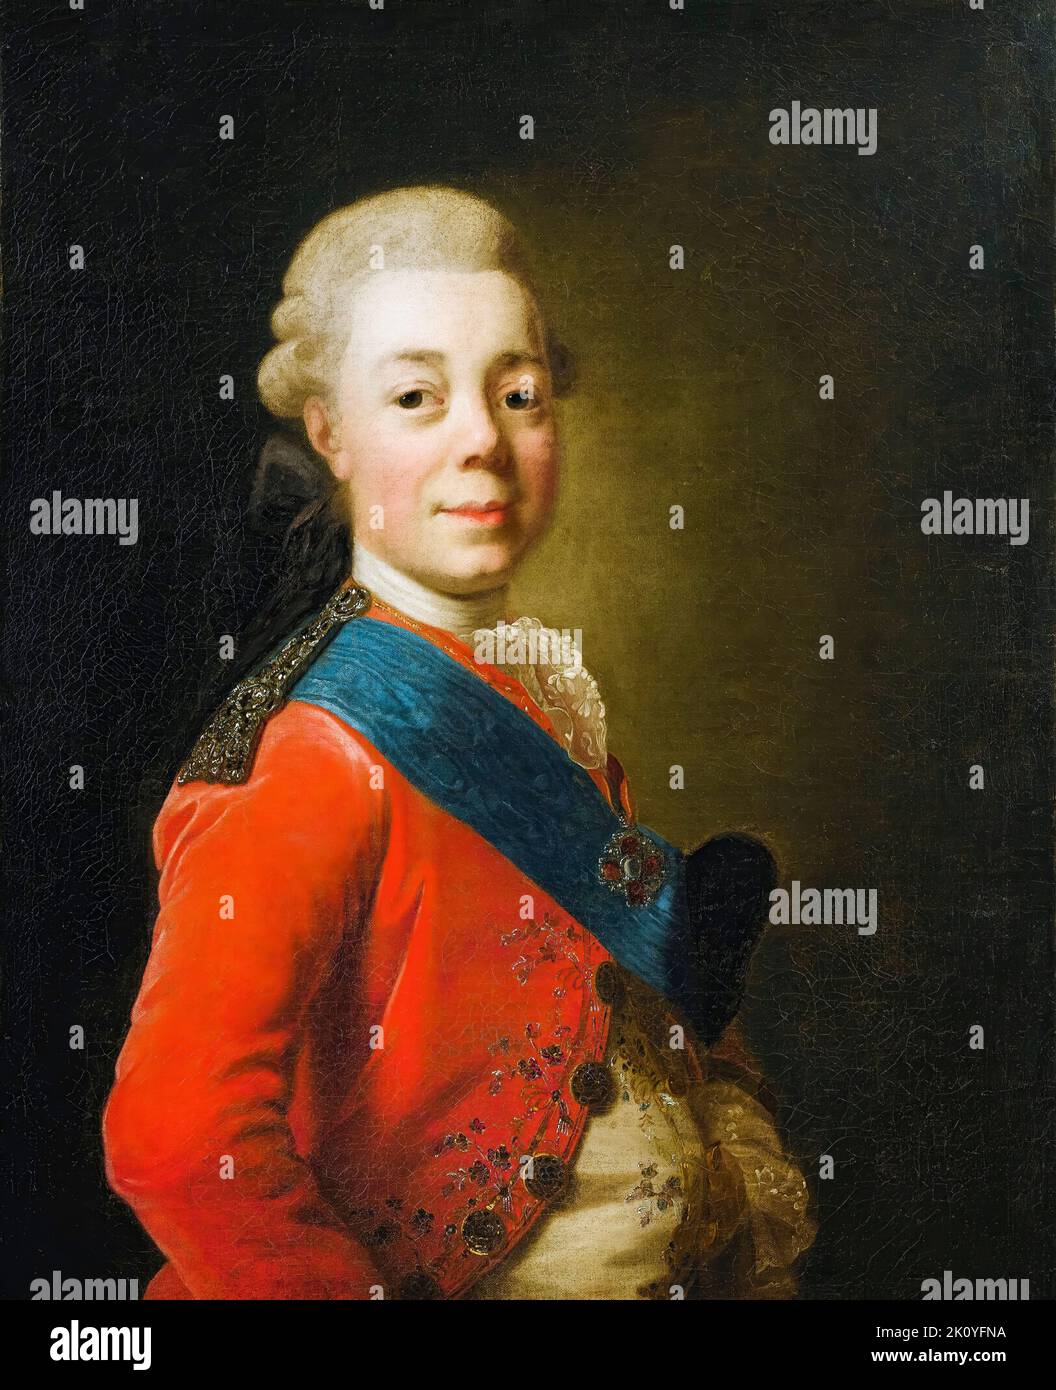 Paul I (1754-1801), Emperor of Russia (1796-1801), portrait painting in oil on canvas by Attributed to Alexander Roslin, before 1793 Stock Photo